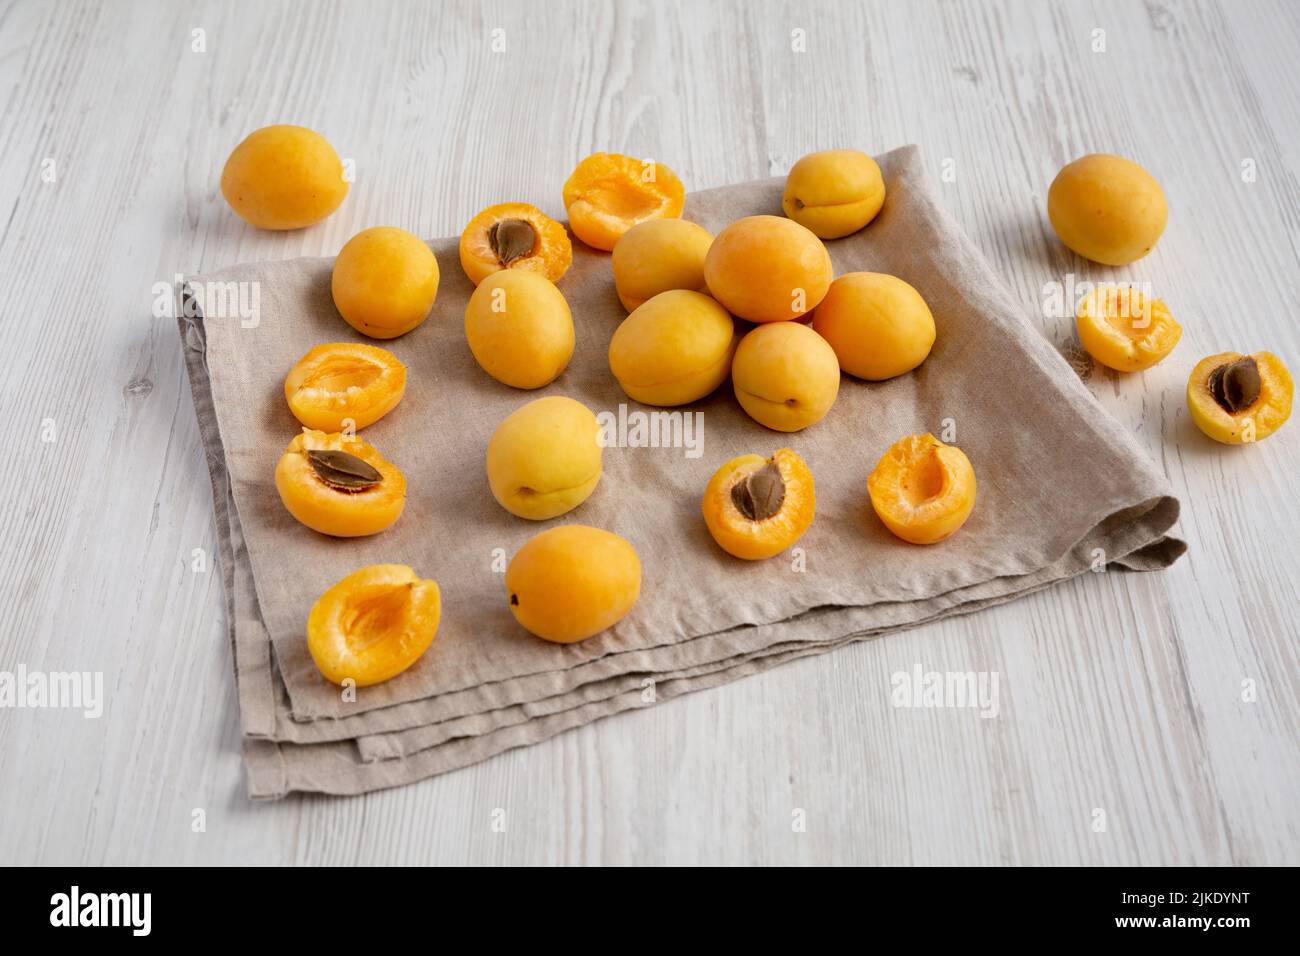 Raw White Apricot Angelcots on a white wooden background, side view. Stock Photo